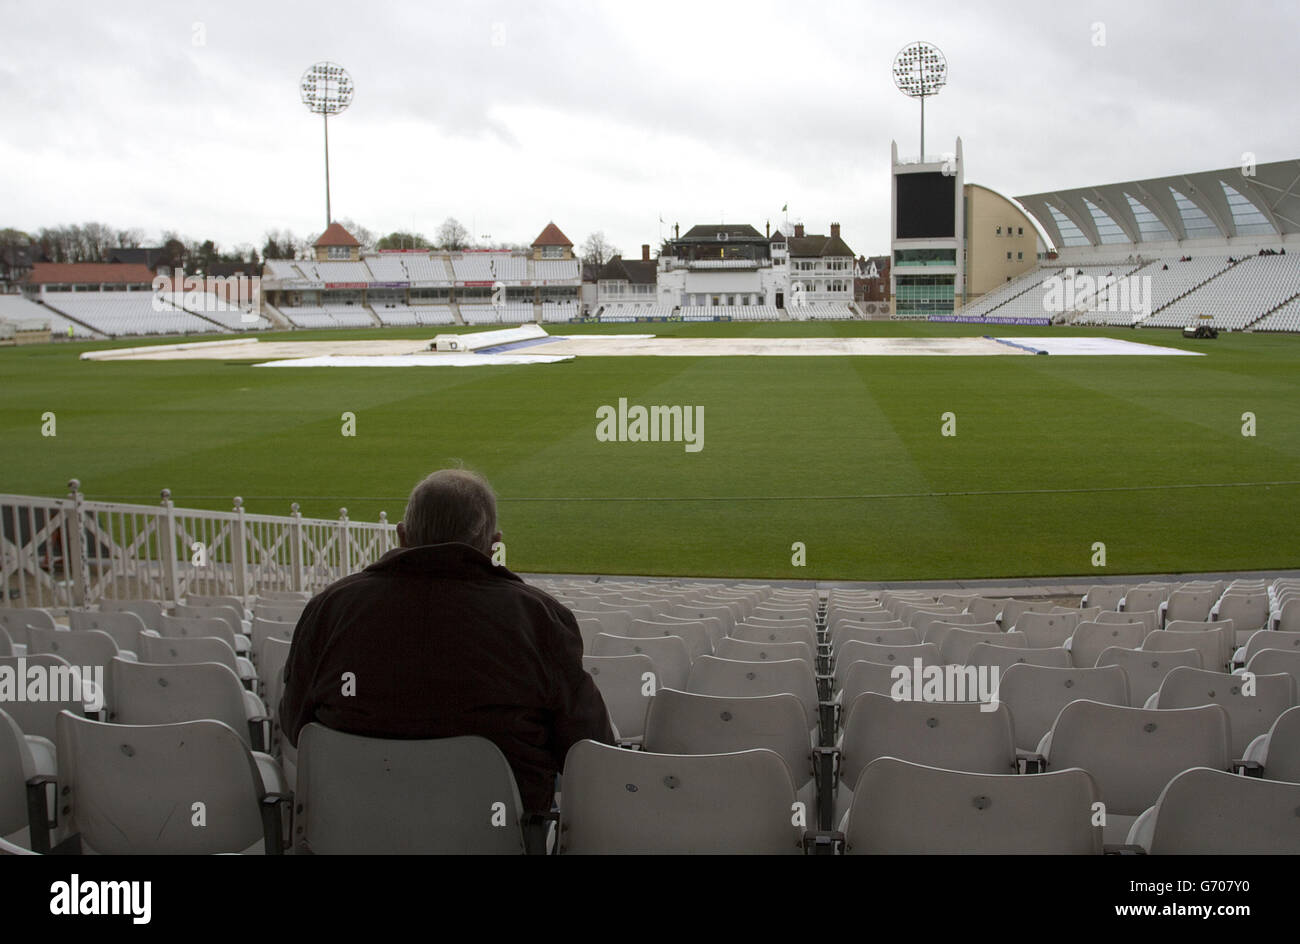 A fan shelters at the back of the stands as rain delays the start of play during the LV=County Championship, Division One match at Trent Bridge, Nottingham. Stock Photo